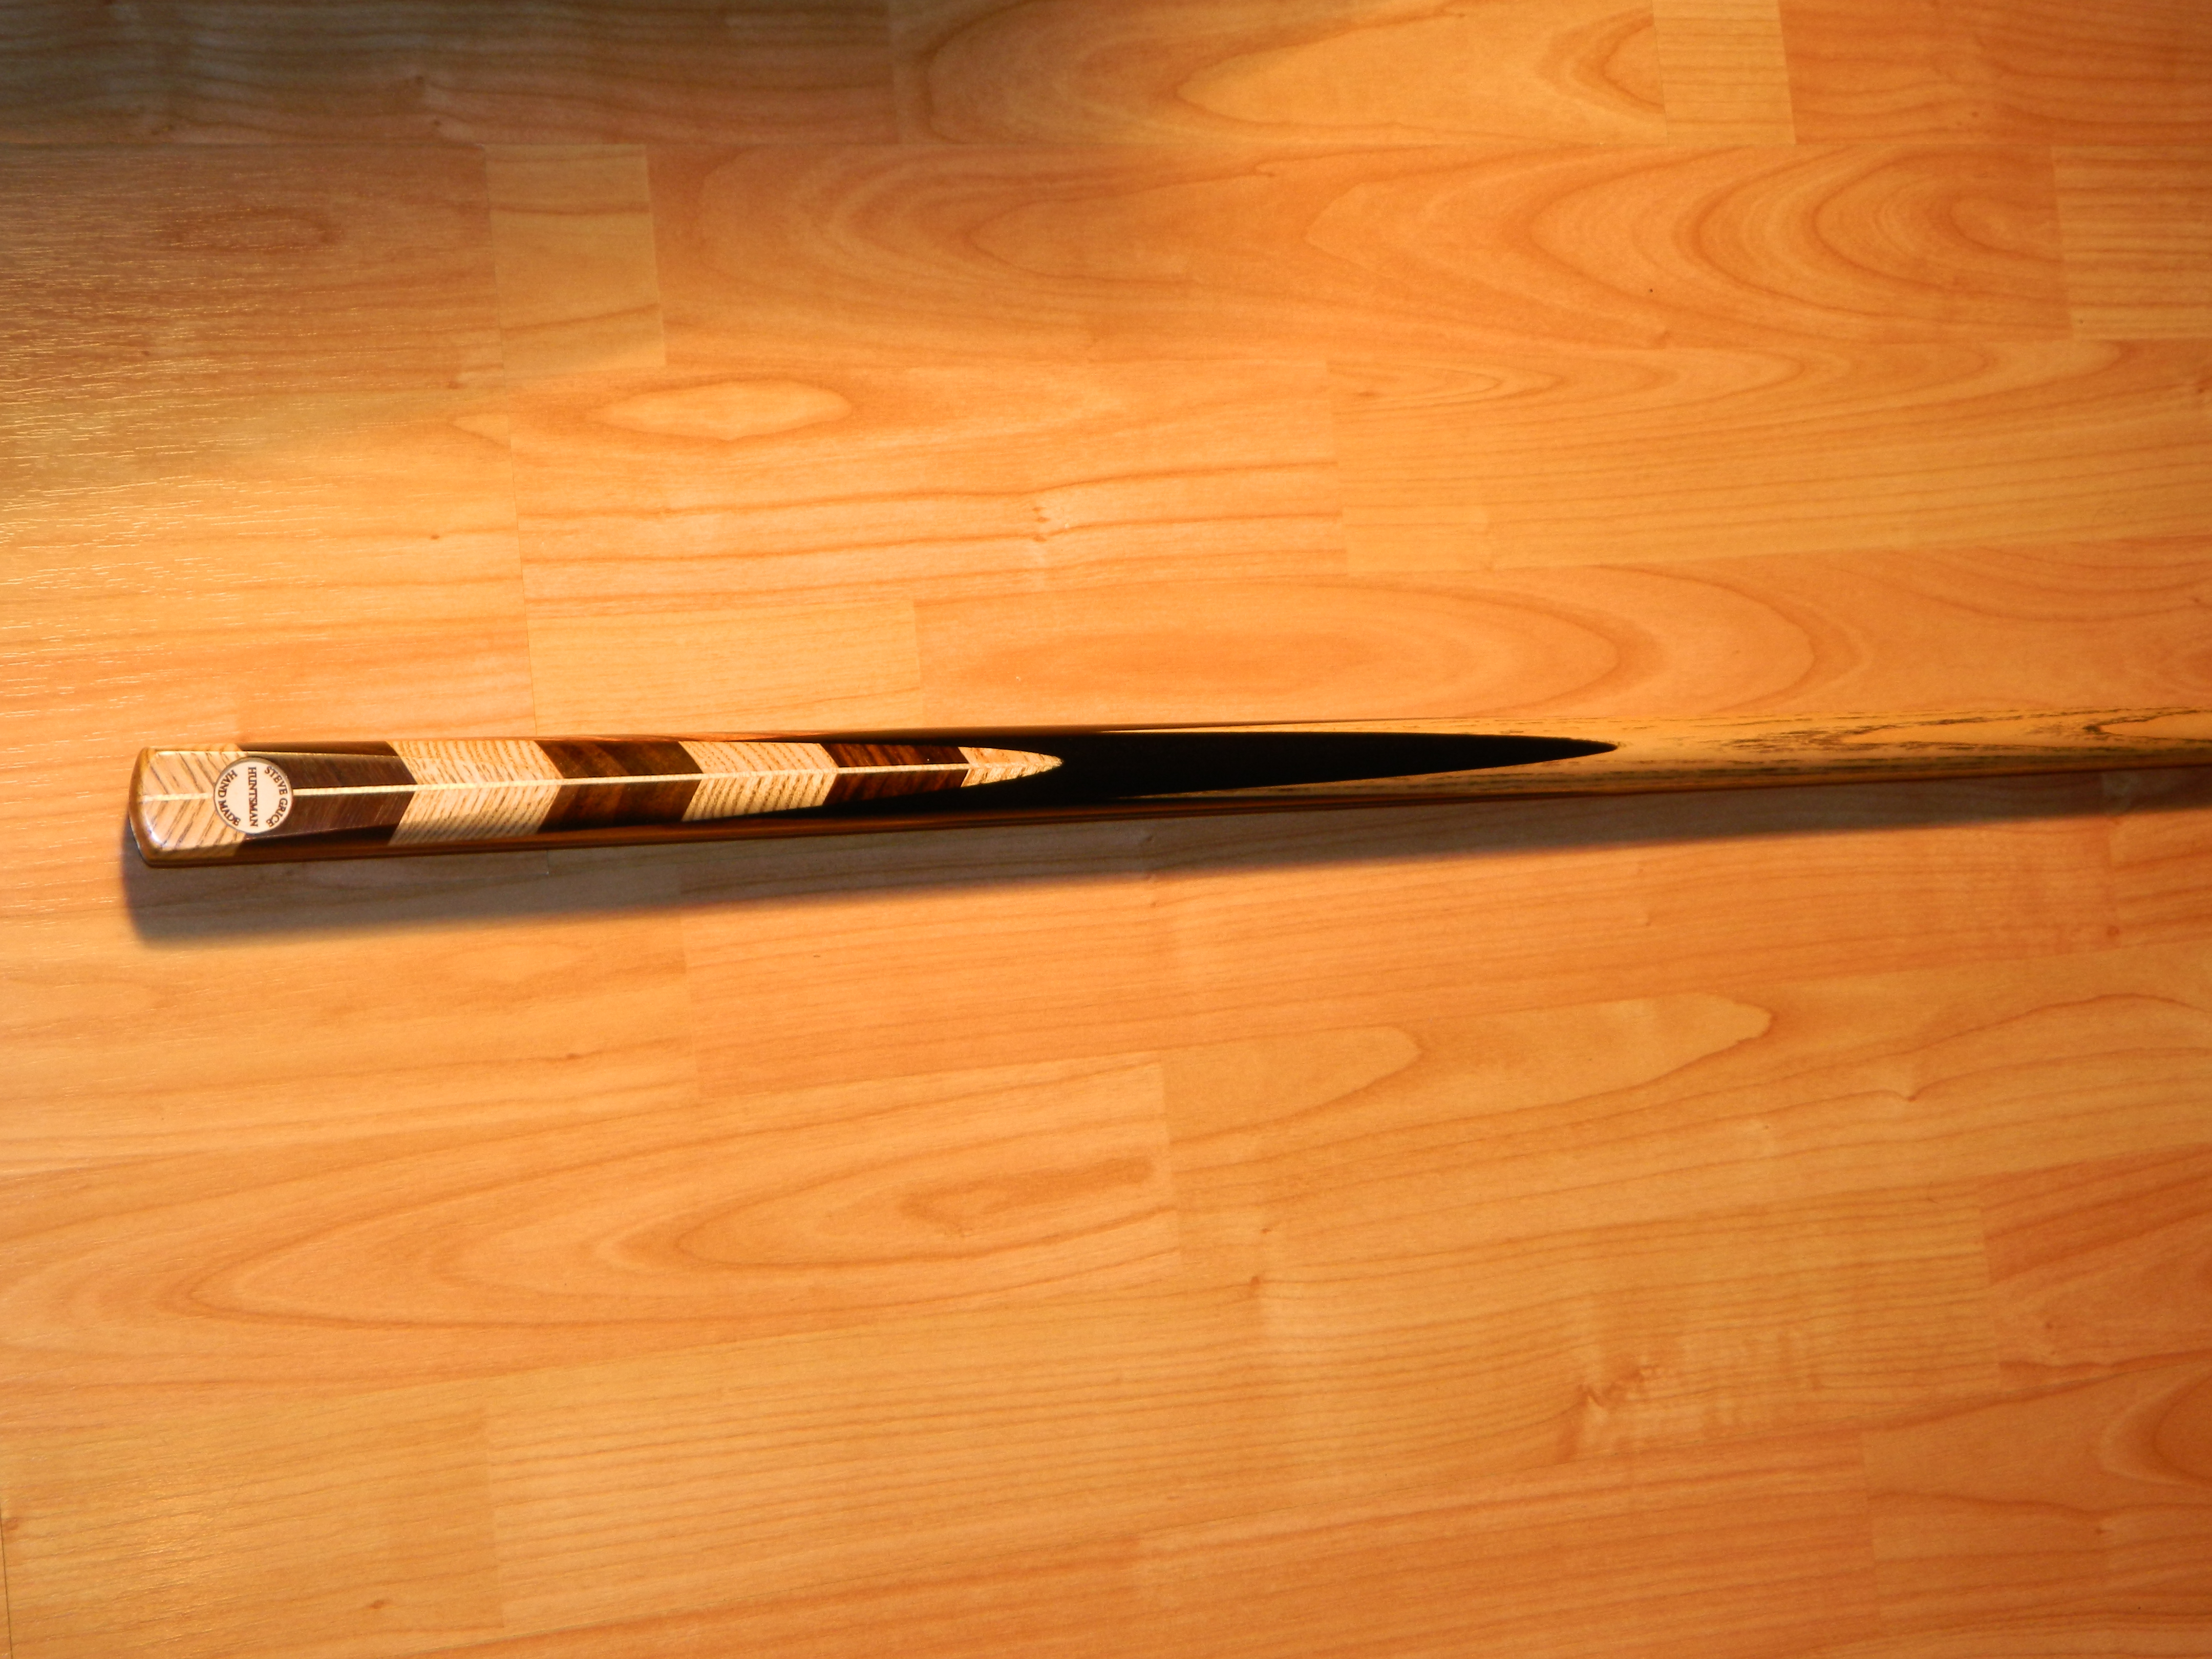 Steve Grice Huntsman cue elaborately  tulip spliced with a feather front wedge and a further 3 kingwood wedges around an ebony hand spliced butt